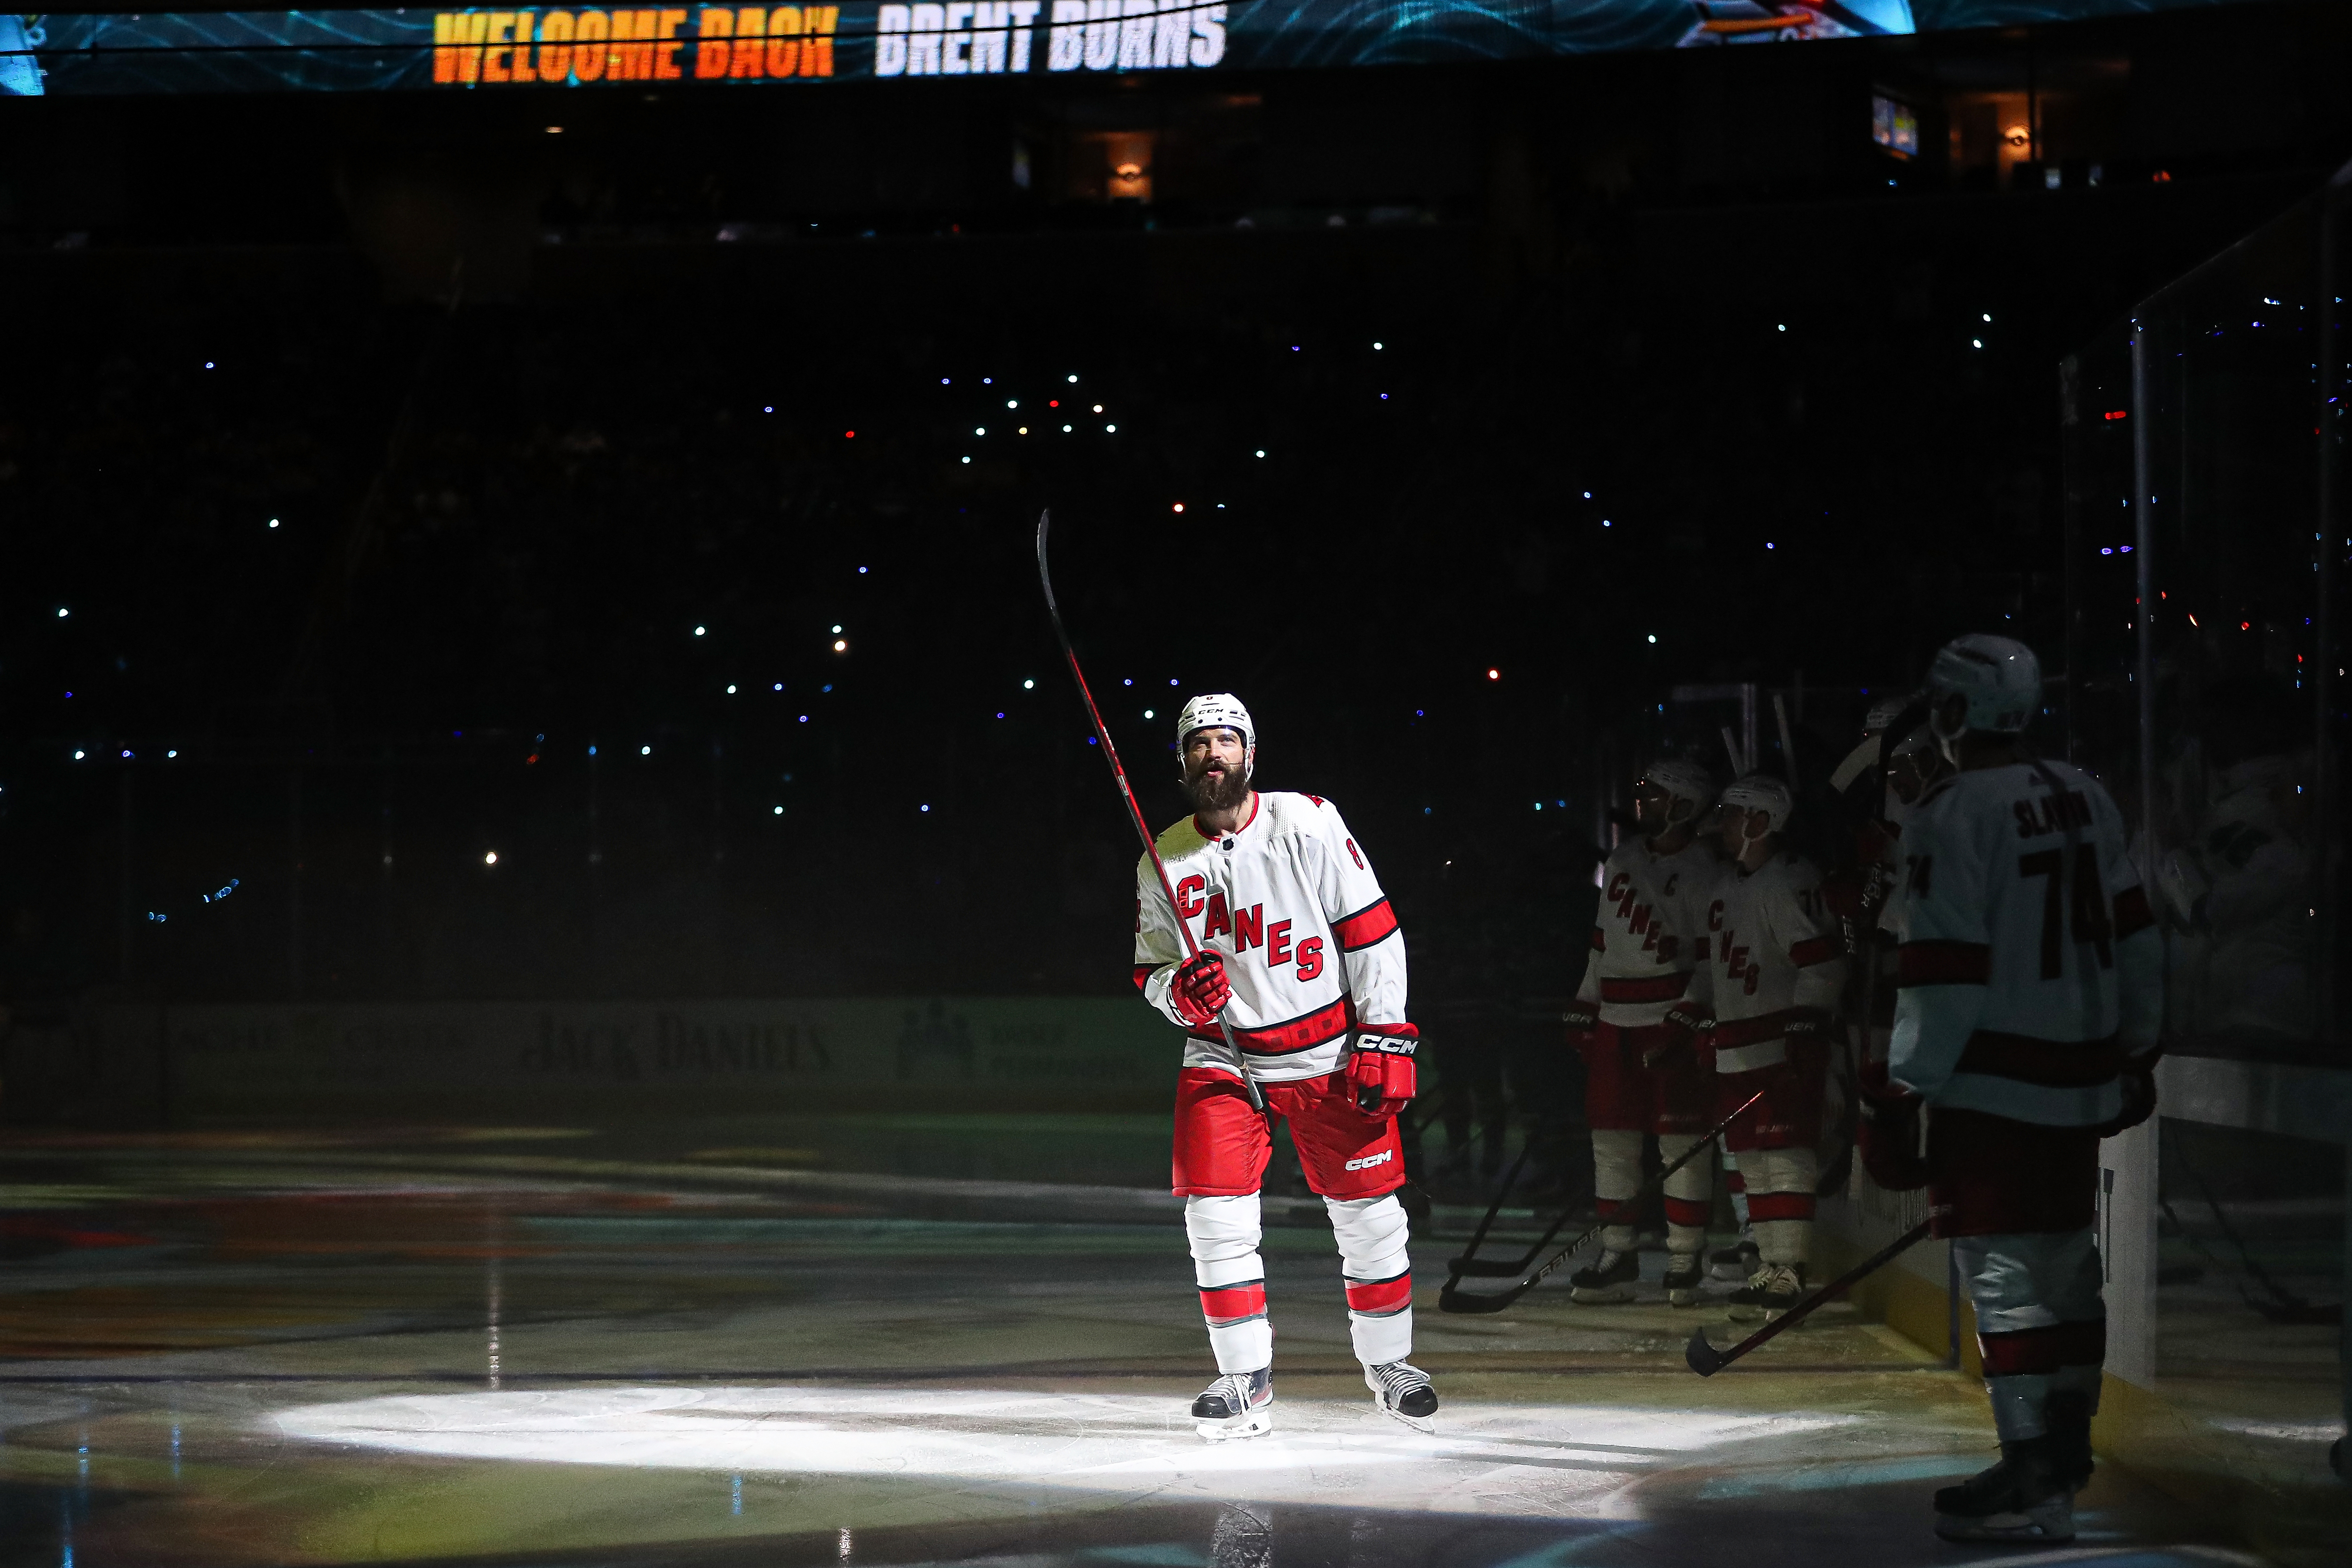 Brent Burns #8 of the Carolina Hurricanes is honored before the game against the San Jose Sharks at SAP Center on October 14, 2022 in San Jose, California.